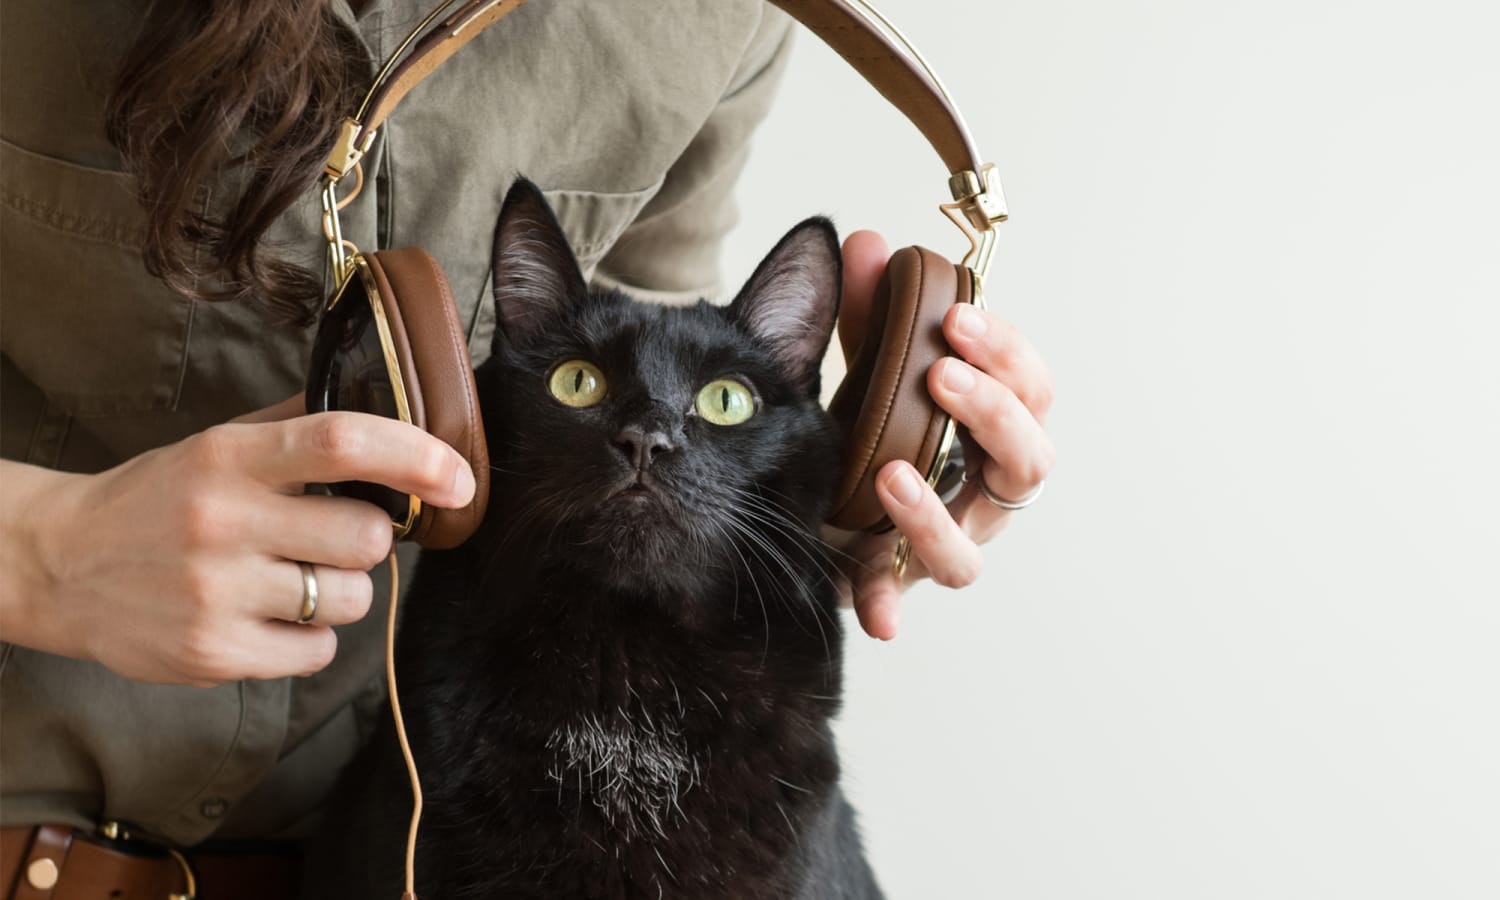 Why I make music for cats (and monkeys and dogs and horses)